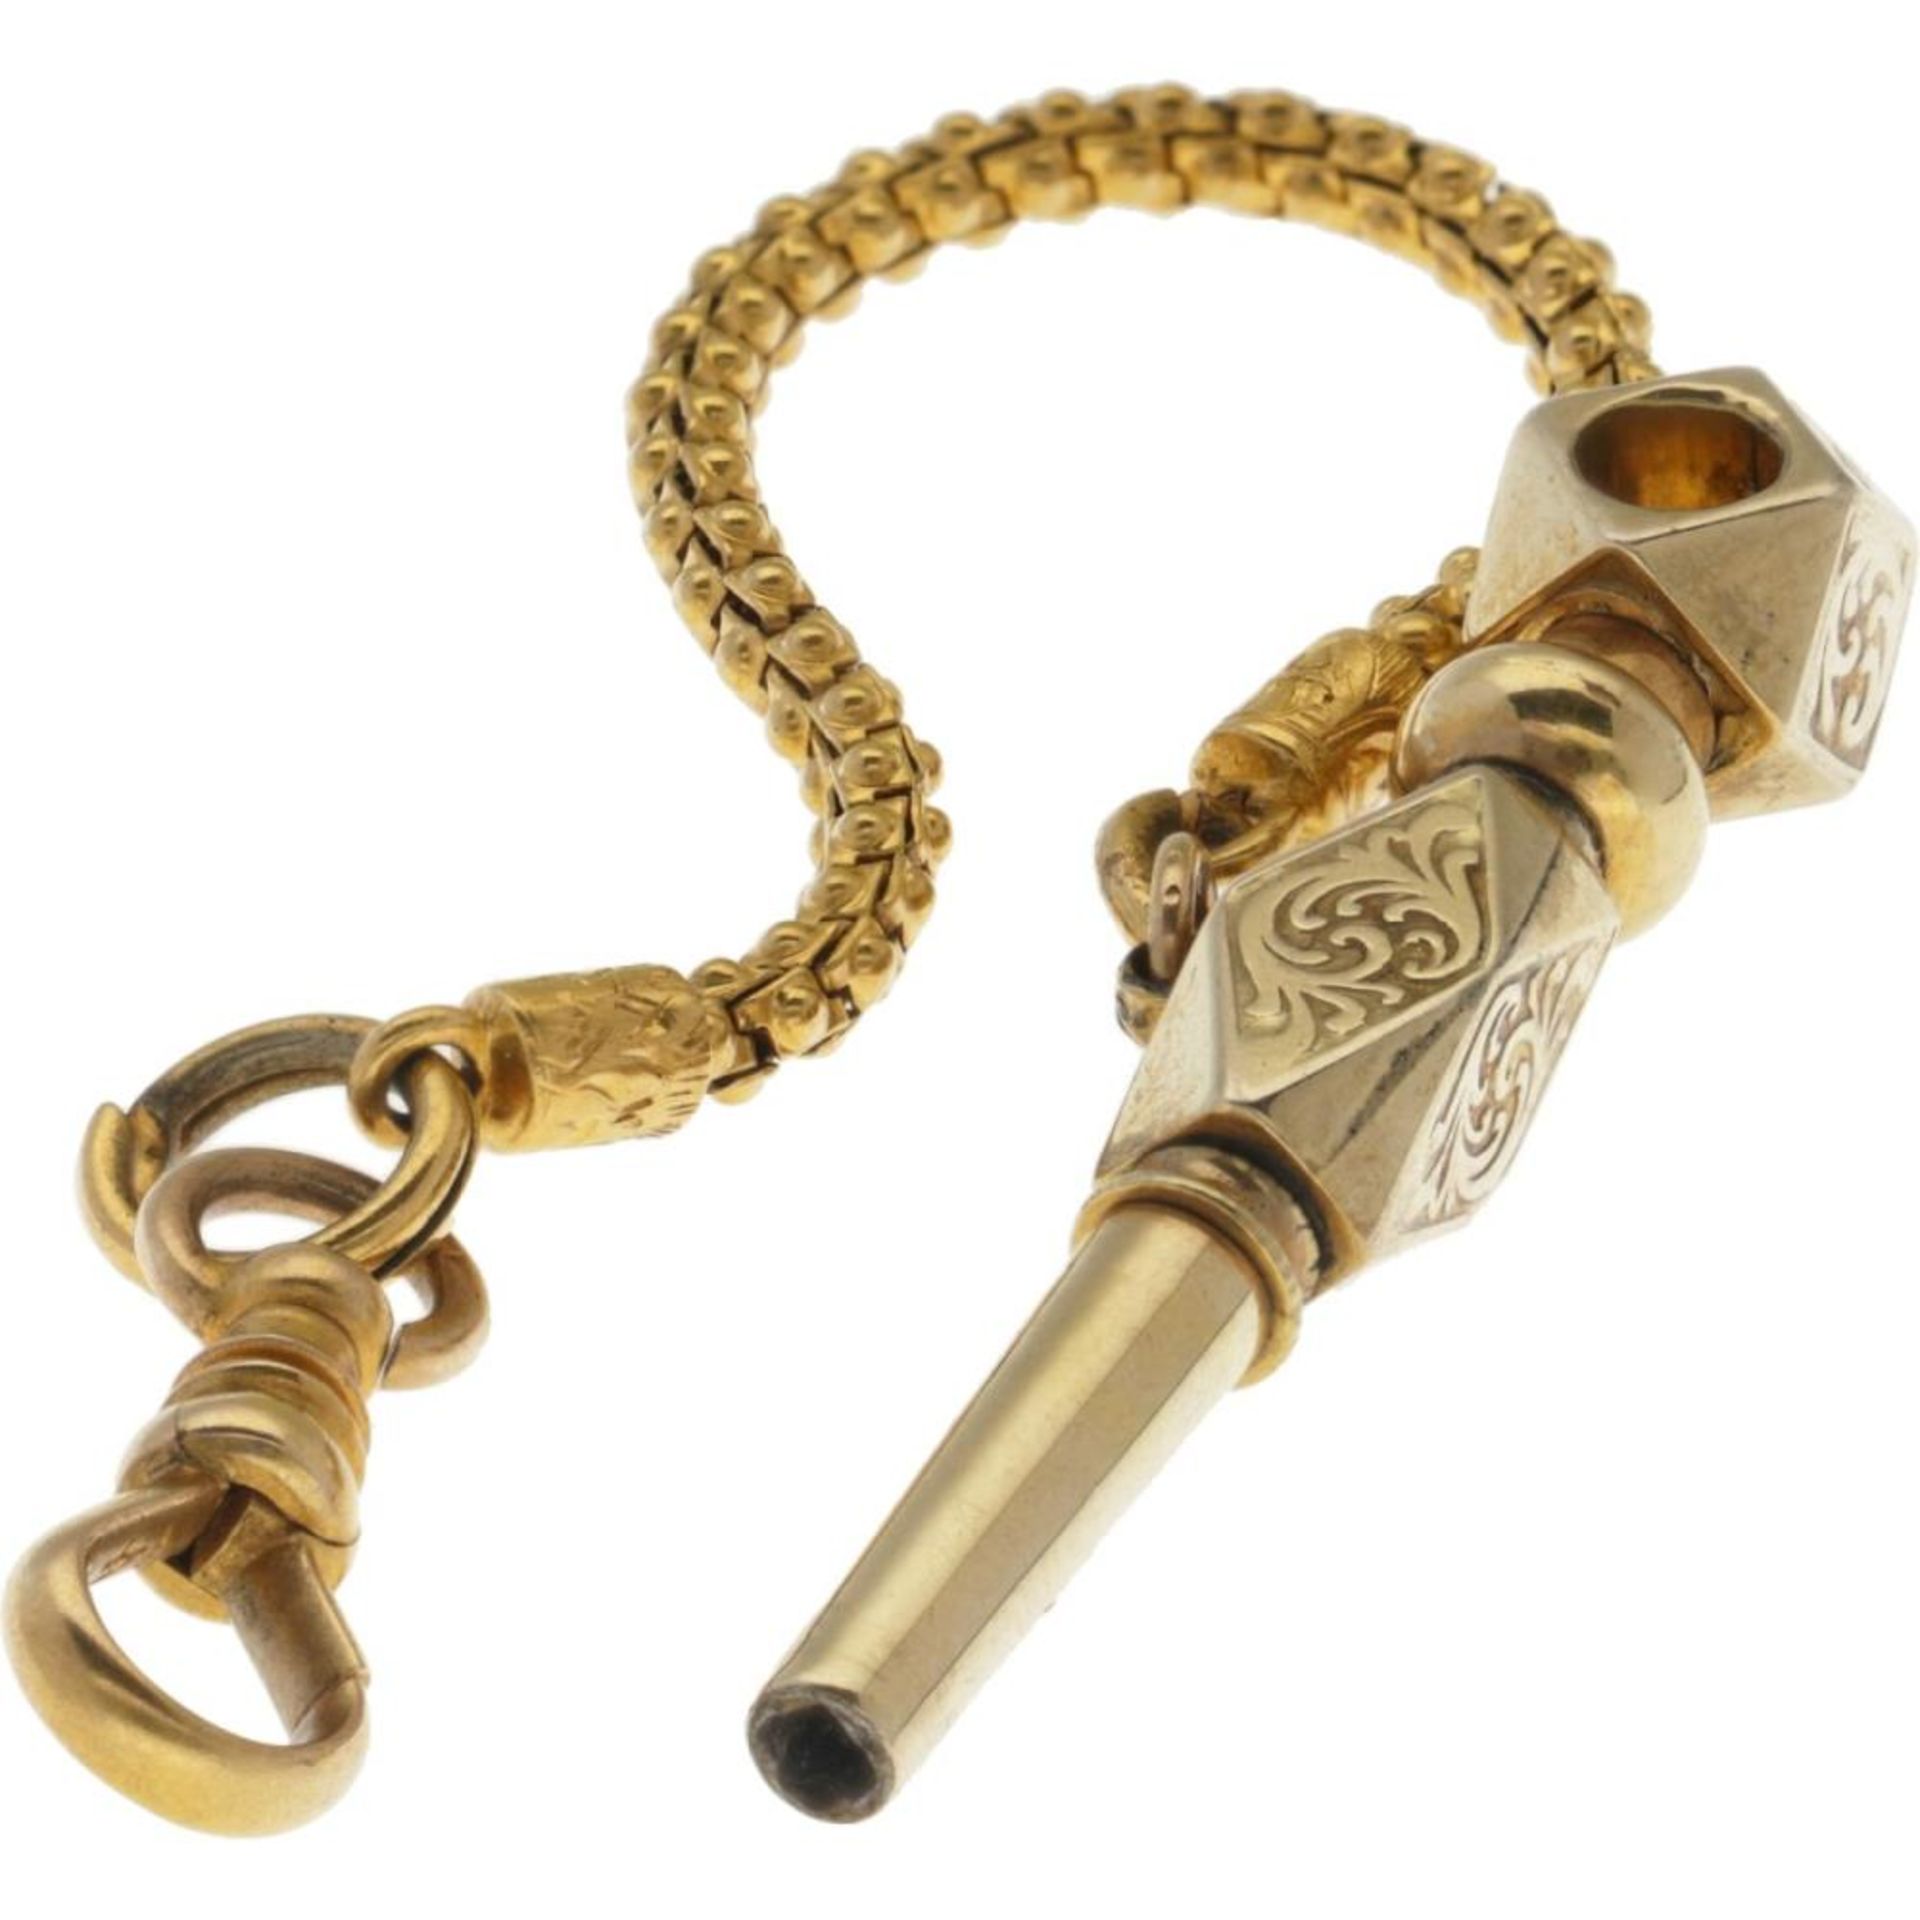 Pocket watch key with chain, gold-plated.